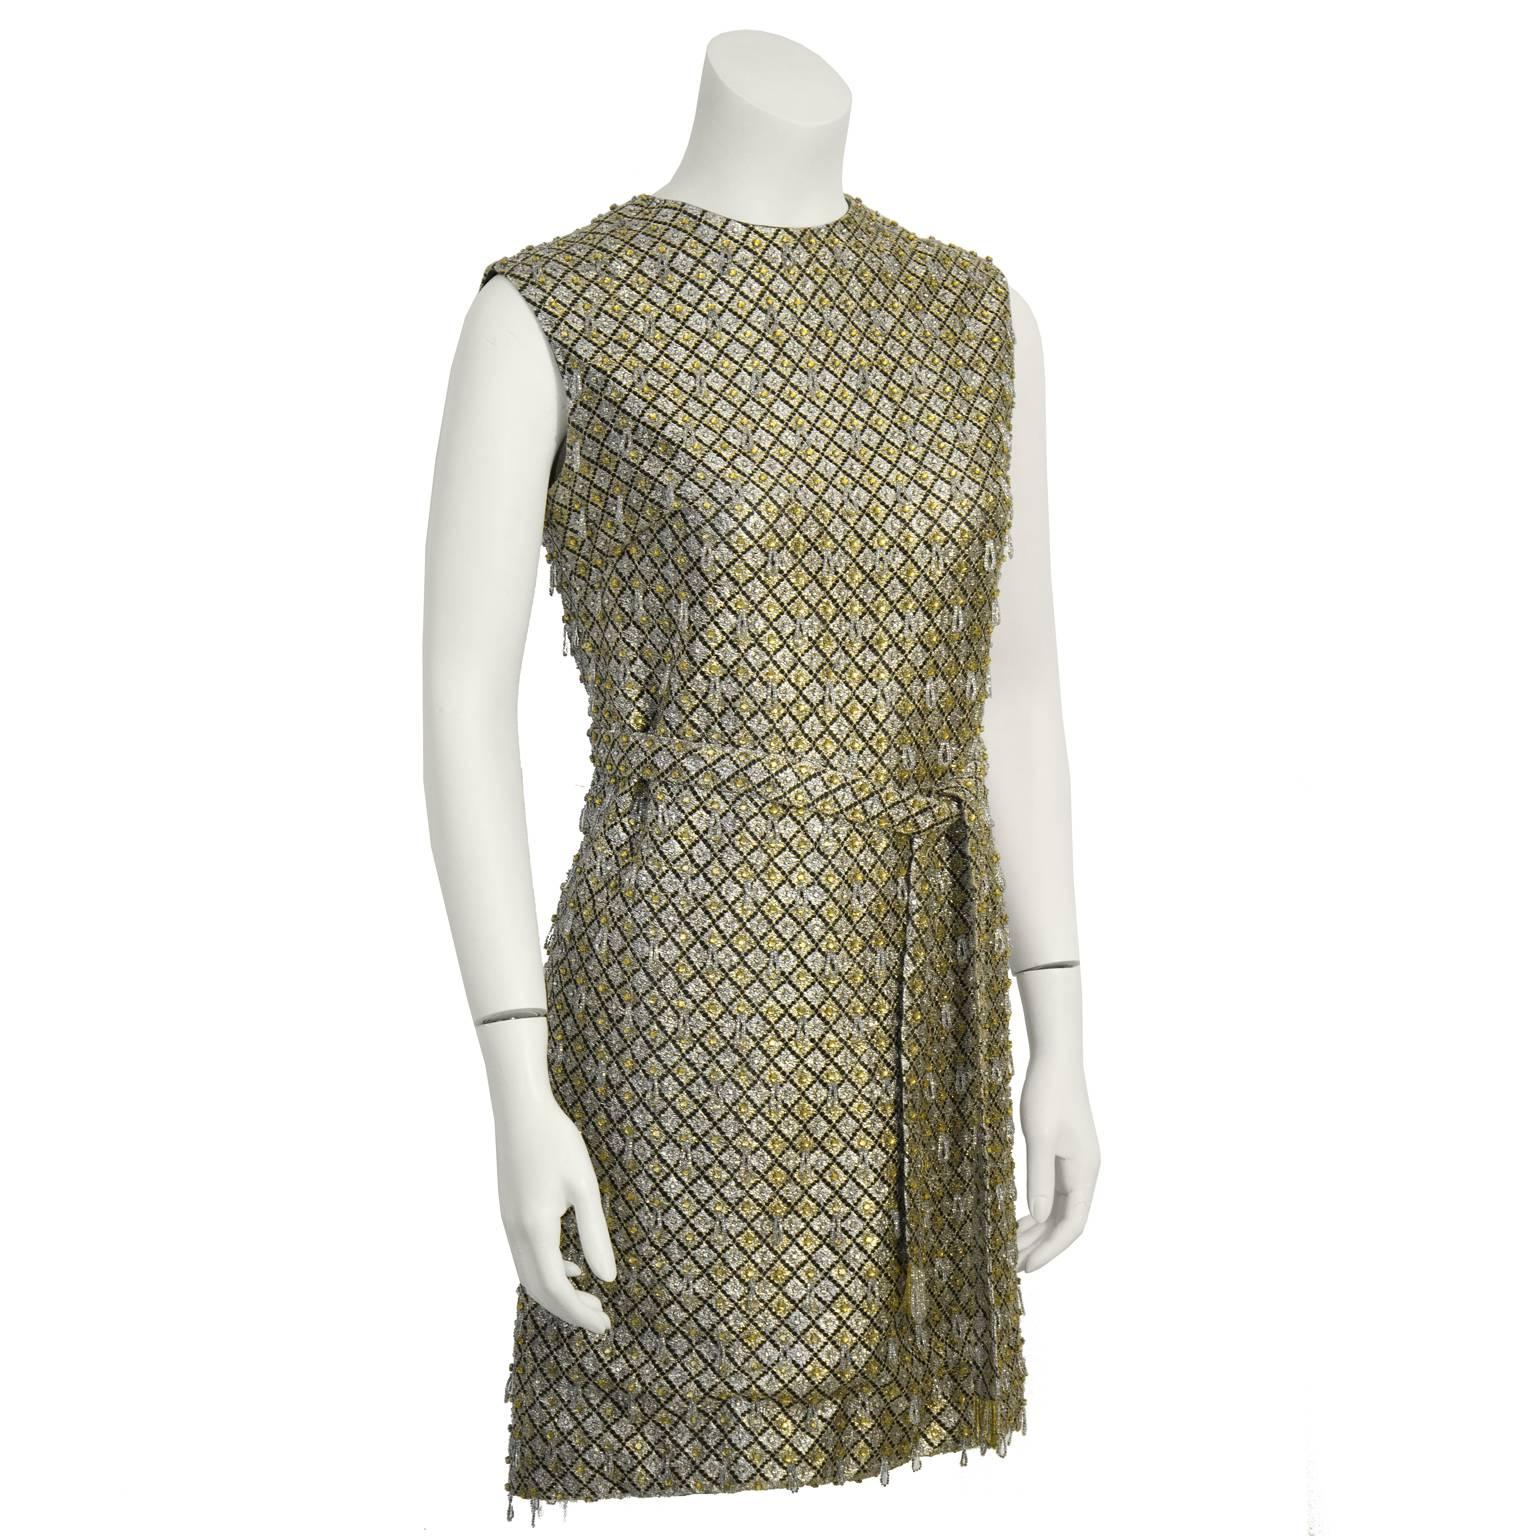 Fabulous anonymous gold and silver sequined and beaded mini dress dates from the 1960s. A-line cut with a high neck and an optional belt of the same material. Back zip closure. Excellent vintage condition. Fits like a US 2-4. Just add a pair of